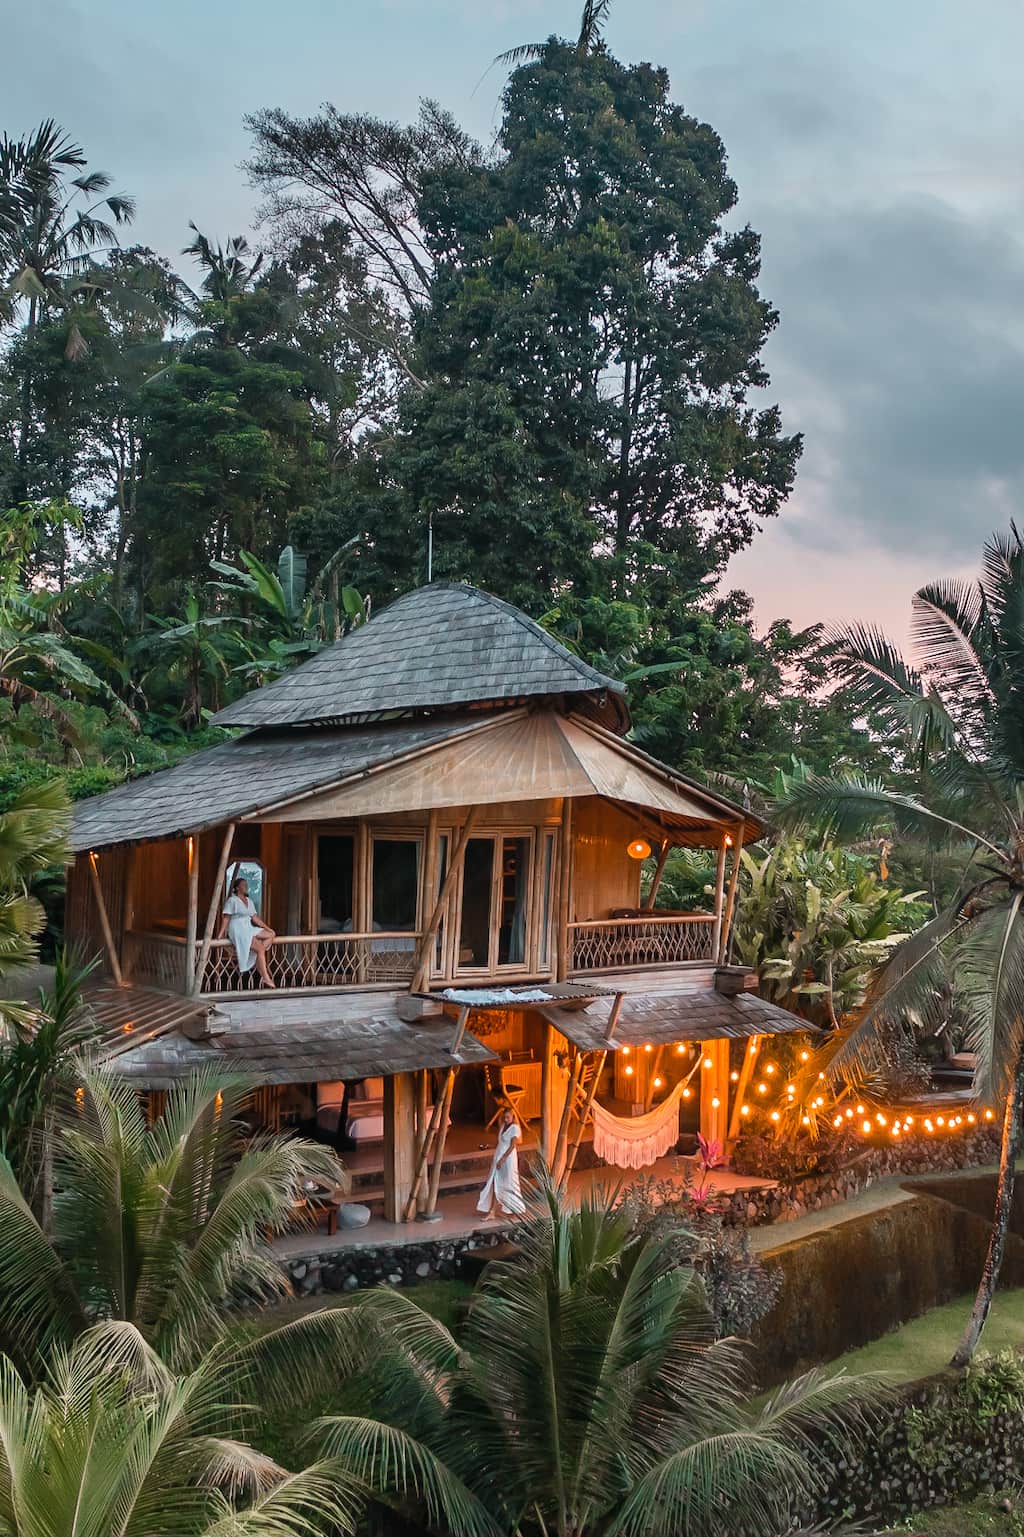 The ultimate Instagram hotel Bali has to offer - Camaya Bamboo House.